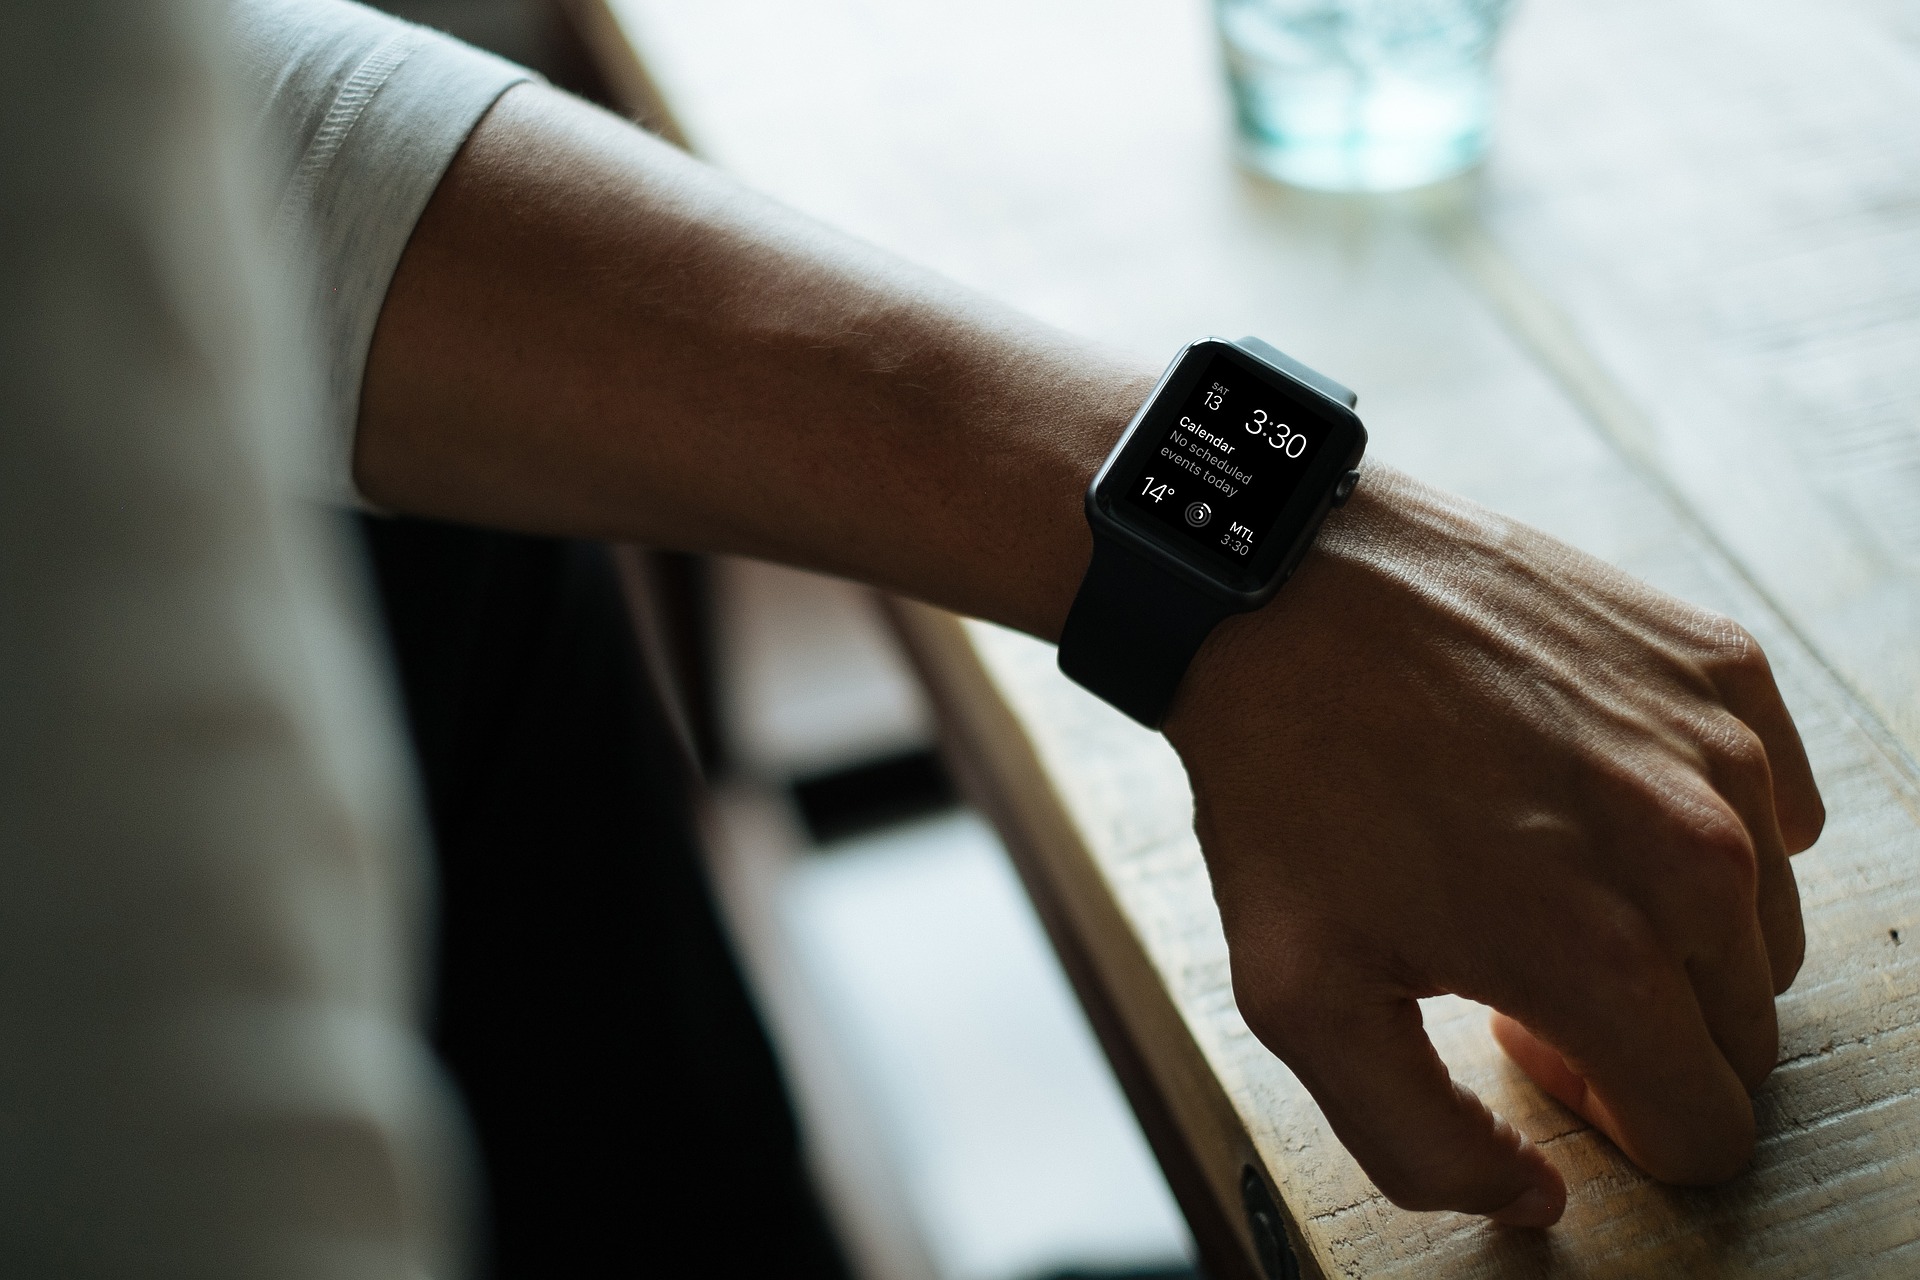 Wearable market grows 16.9 per cent in Q4 2016, Fitbit still leads the race: IDC